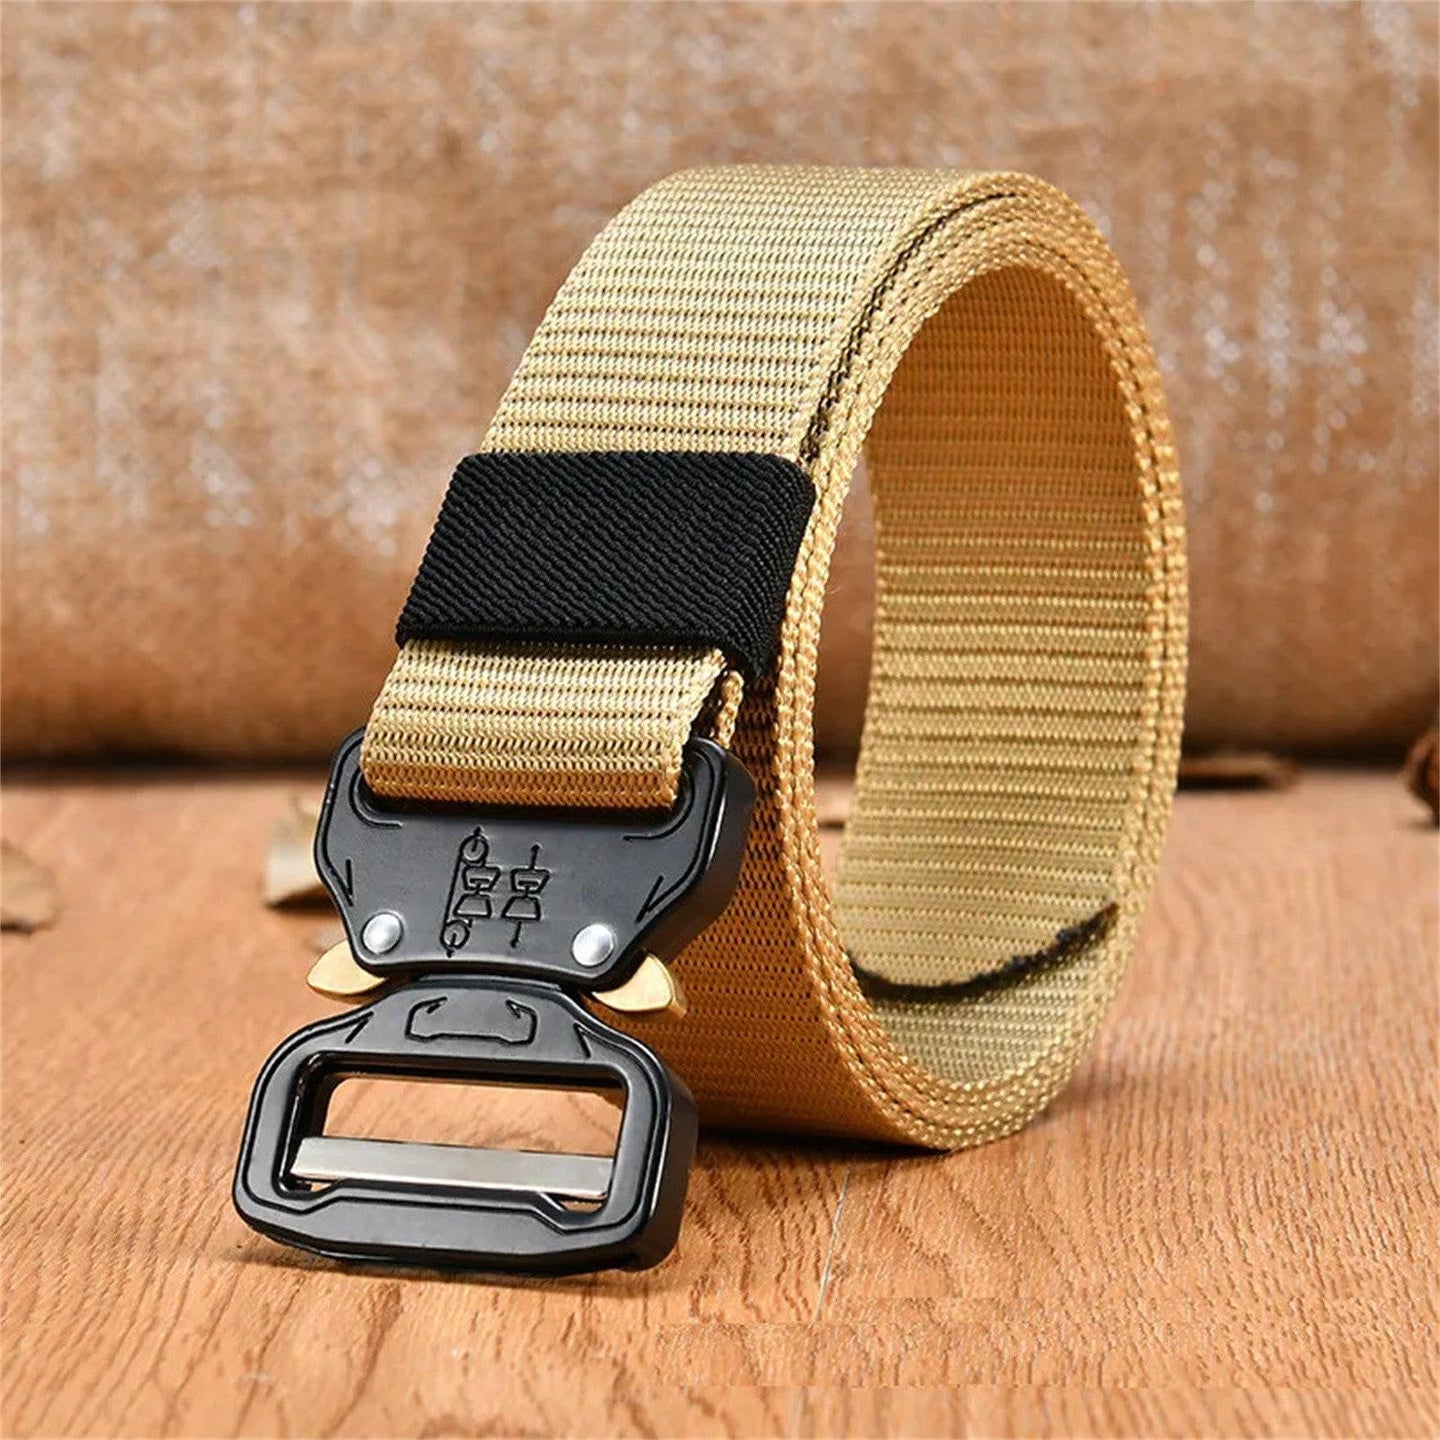 Buy Mountgear Multifunctional Men's Outdoor Tactical Belt Outside Military Training Belt discounted | Products On Sale Australia